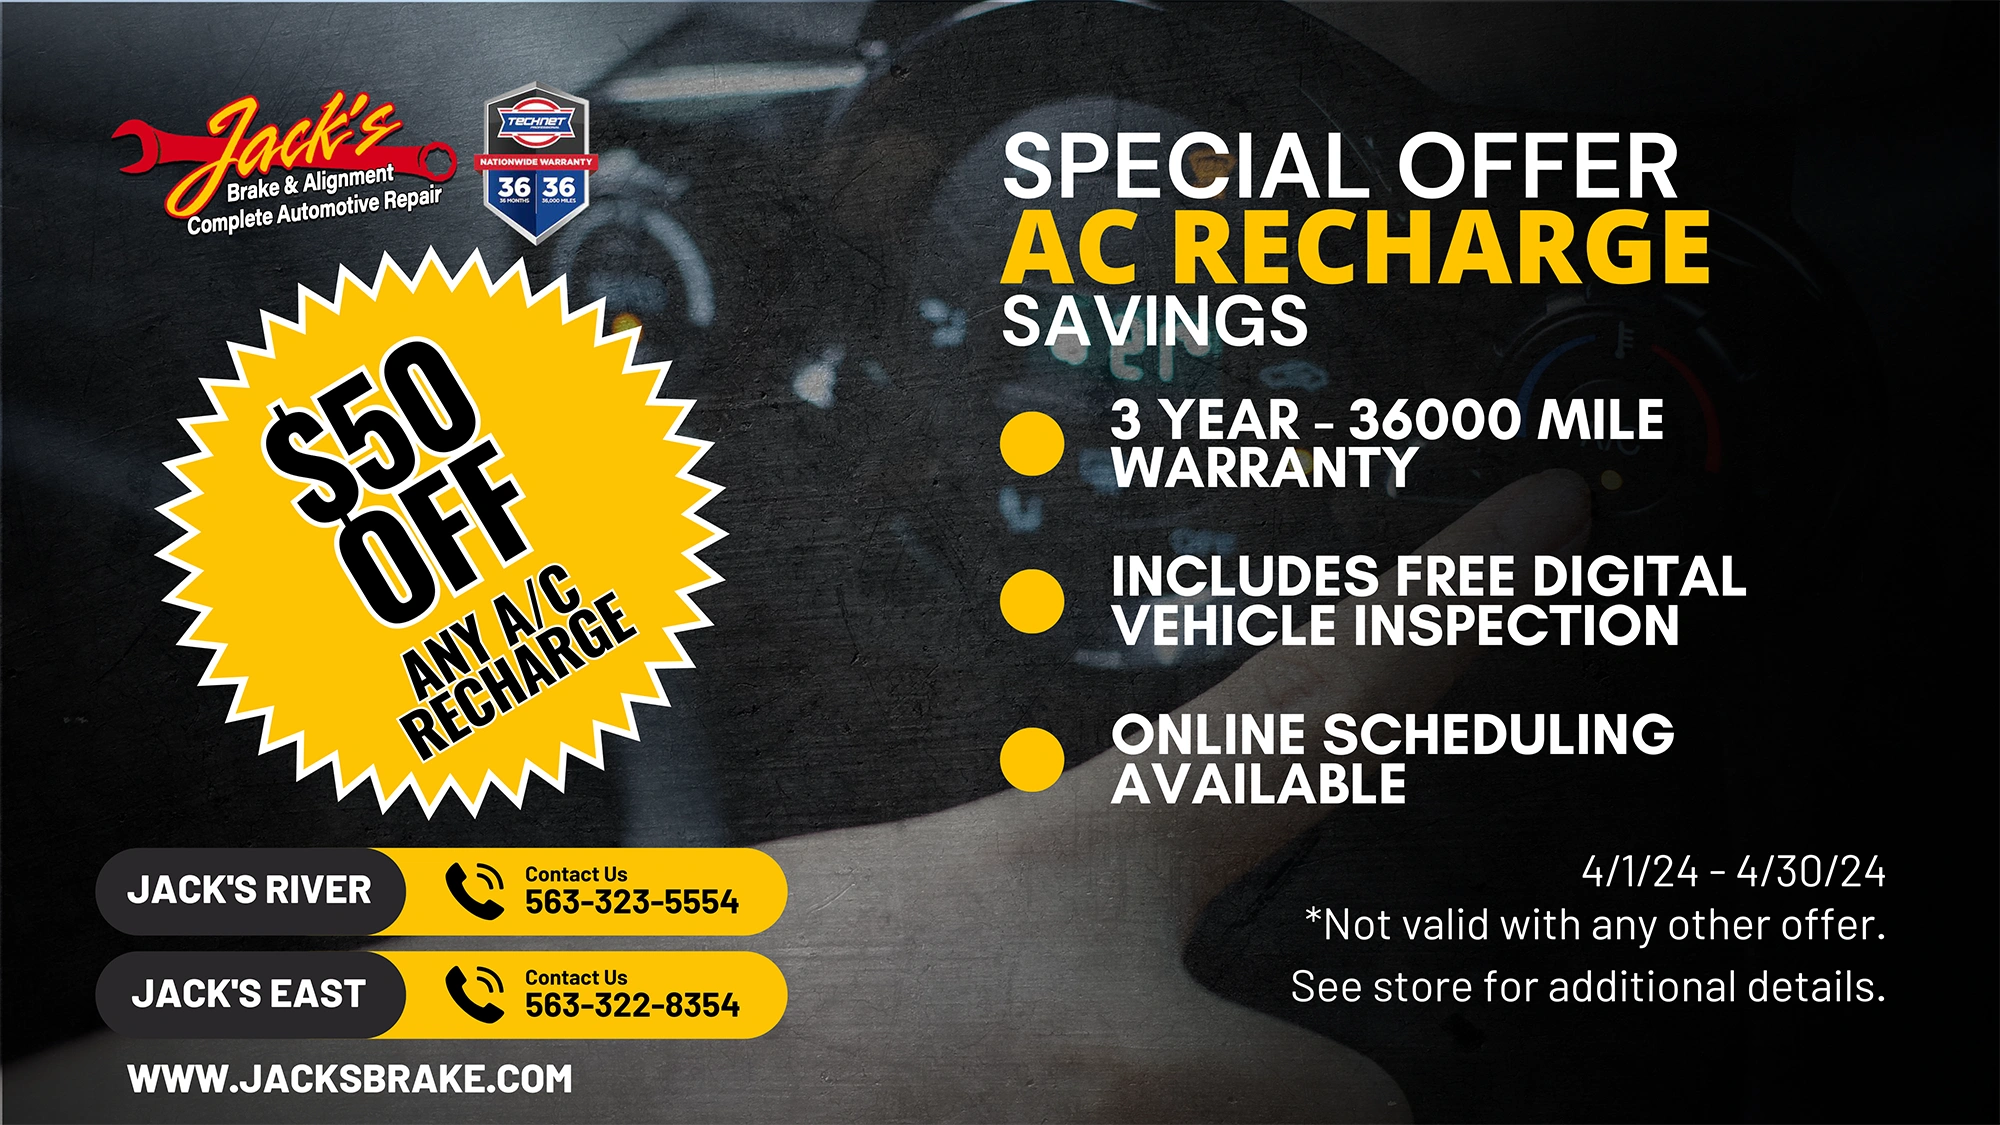 AC recharge savings in davenport iowa only at jacks brake & alignment